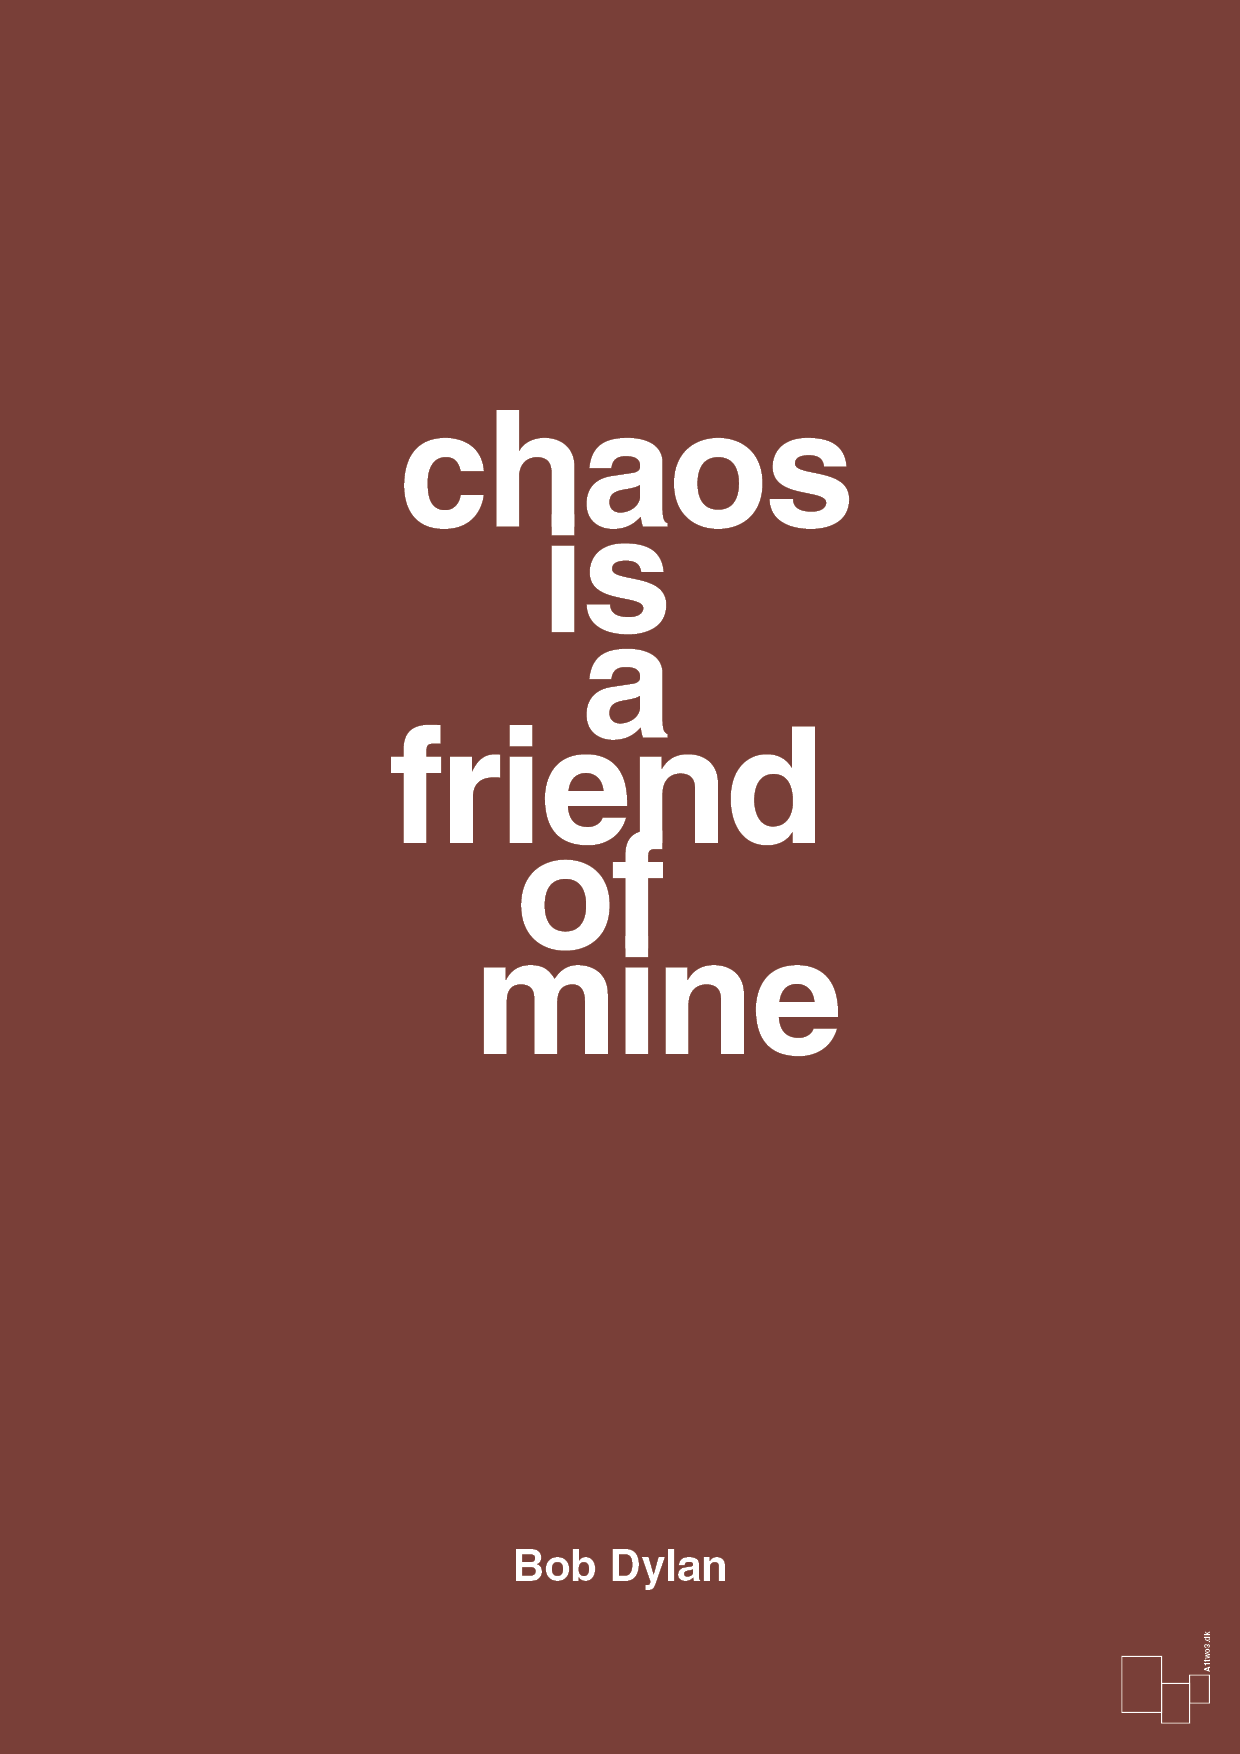 chaos is a friend of mine - Plakat med Citater i Red Pepper